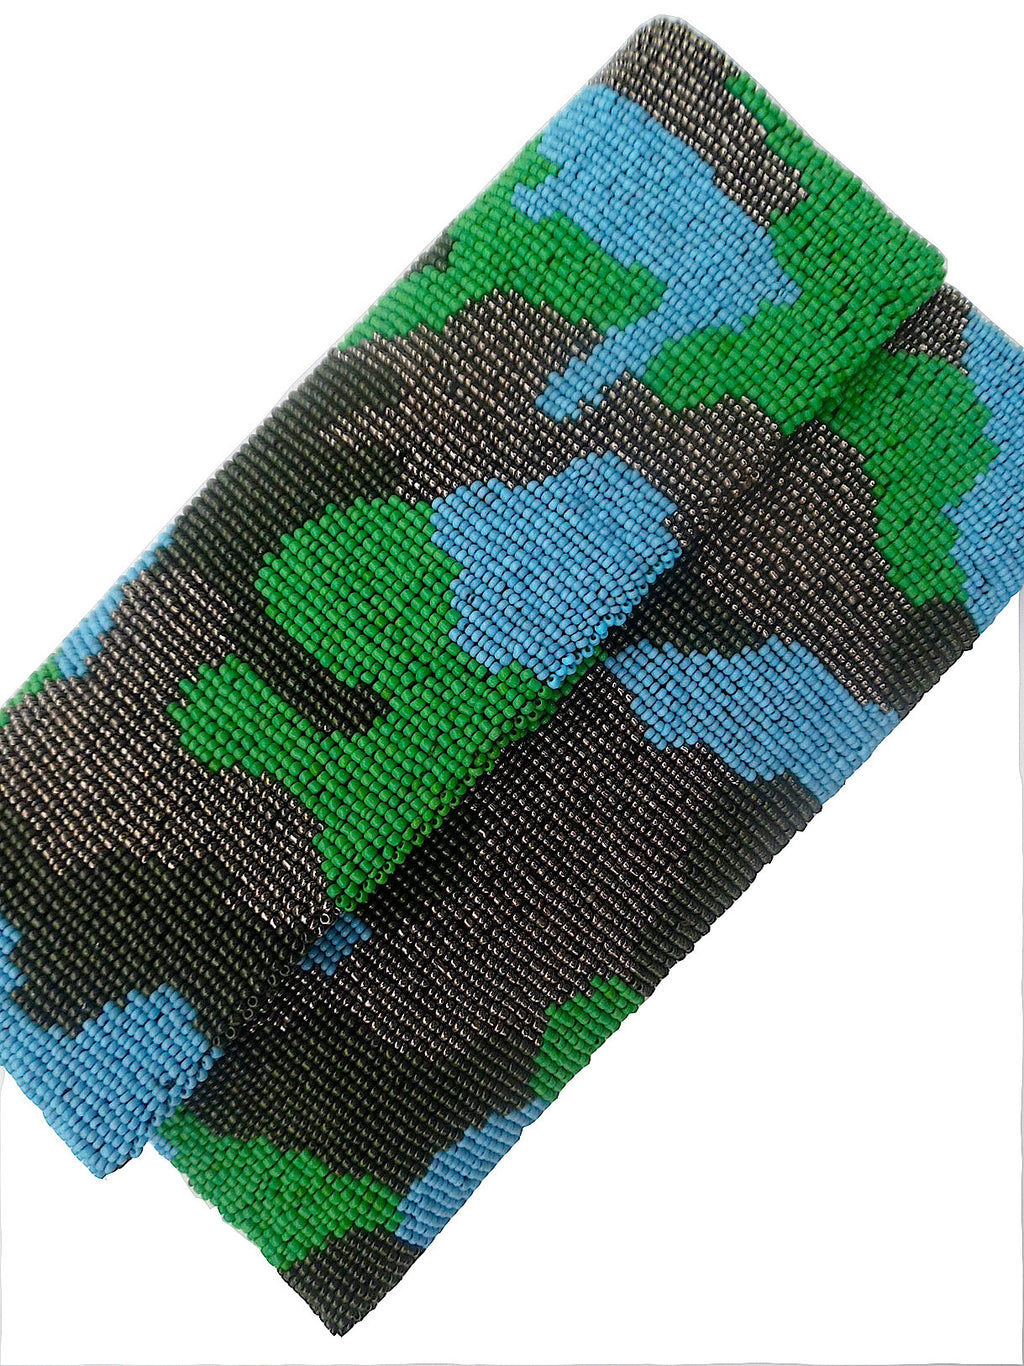 Beaded Envelope Clutch Bag Camo Turquoise